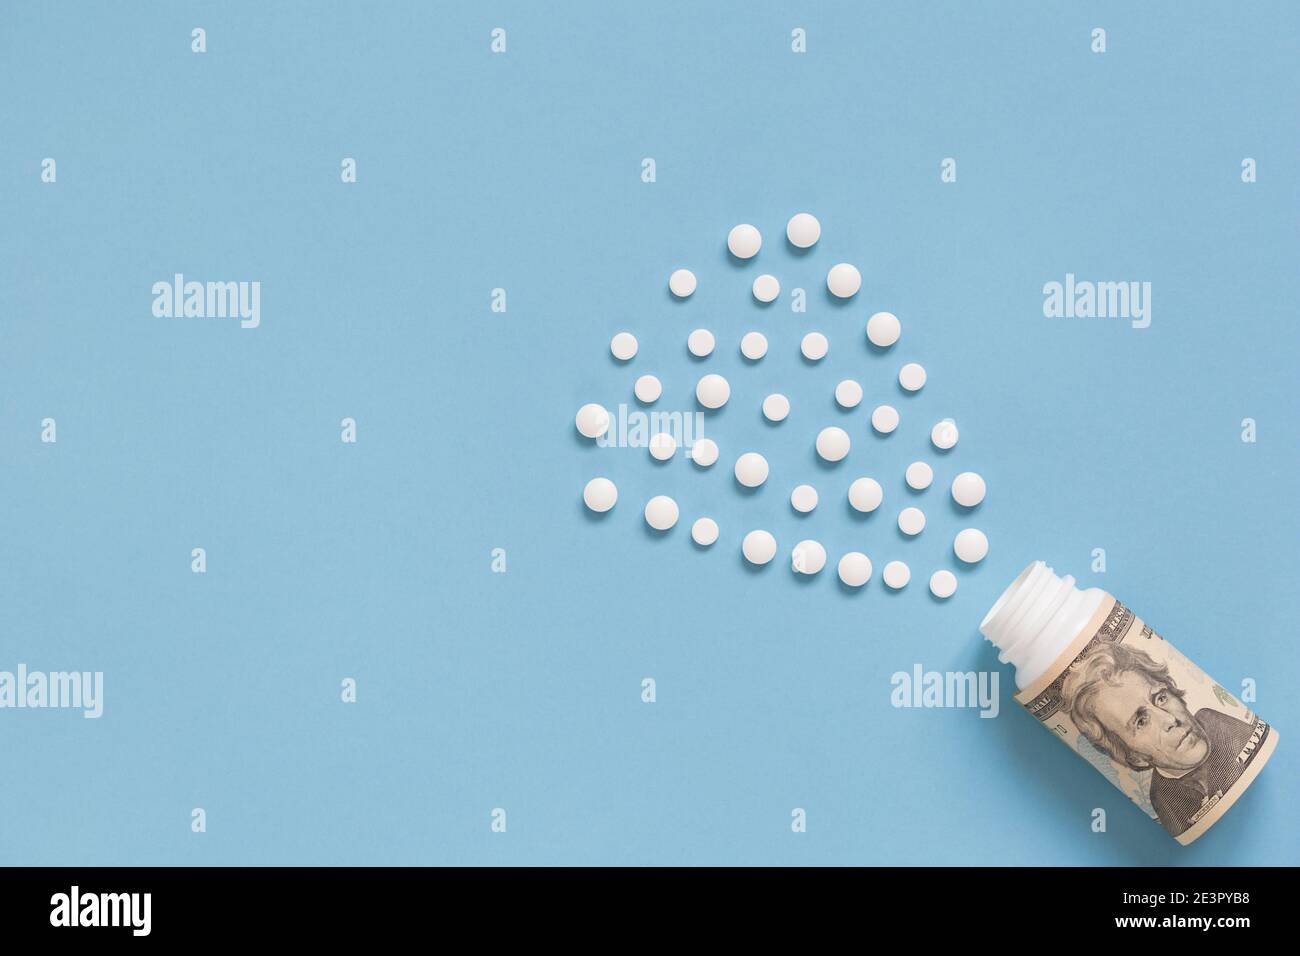 Medical bottle with dollars and many white pills. The concept of insurance medicine, high cost of drugs. Isolated on a blue background. Healthcare. Stock Photo